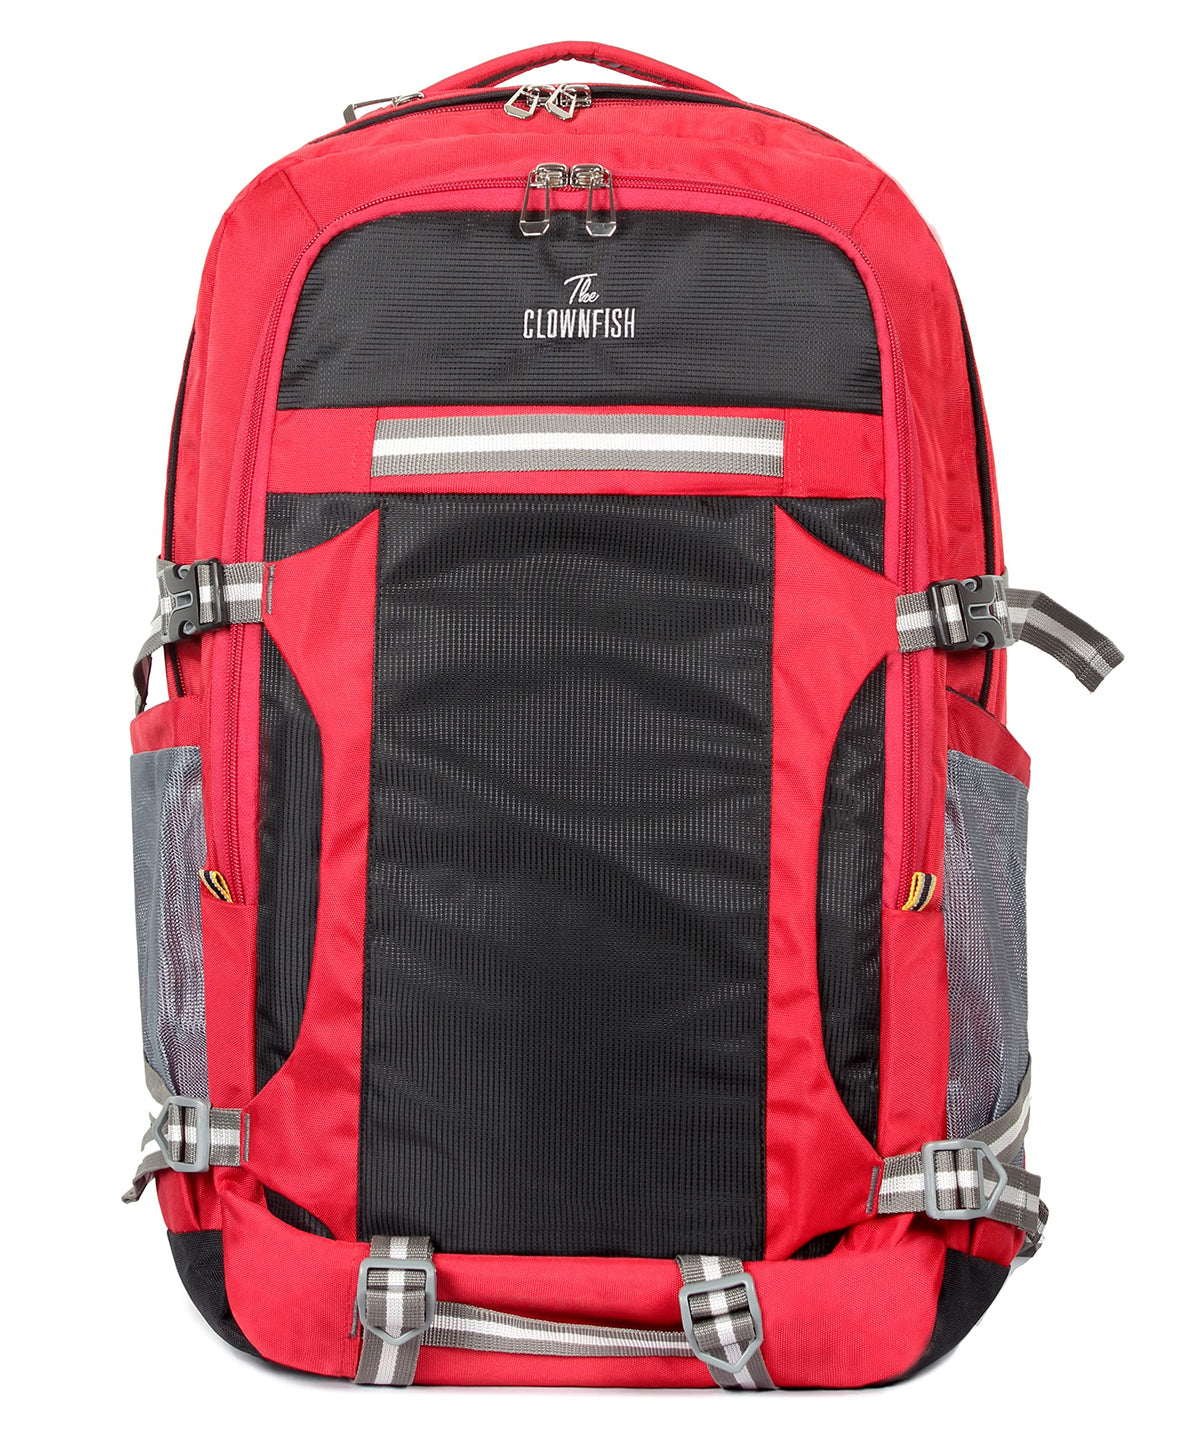 THE CLOWNFISH Mission 48 Litres Polyester Unisex Travel Backpack Rucksack for Outdoor Sports Camp Trek (Red)